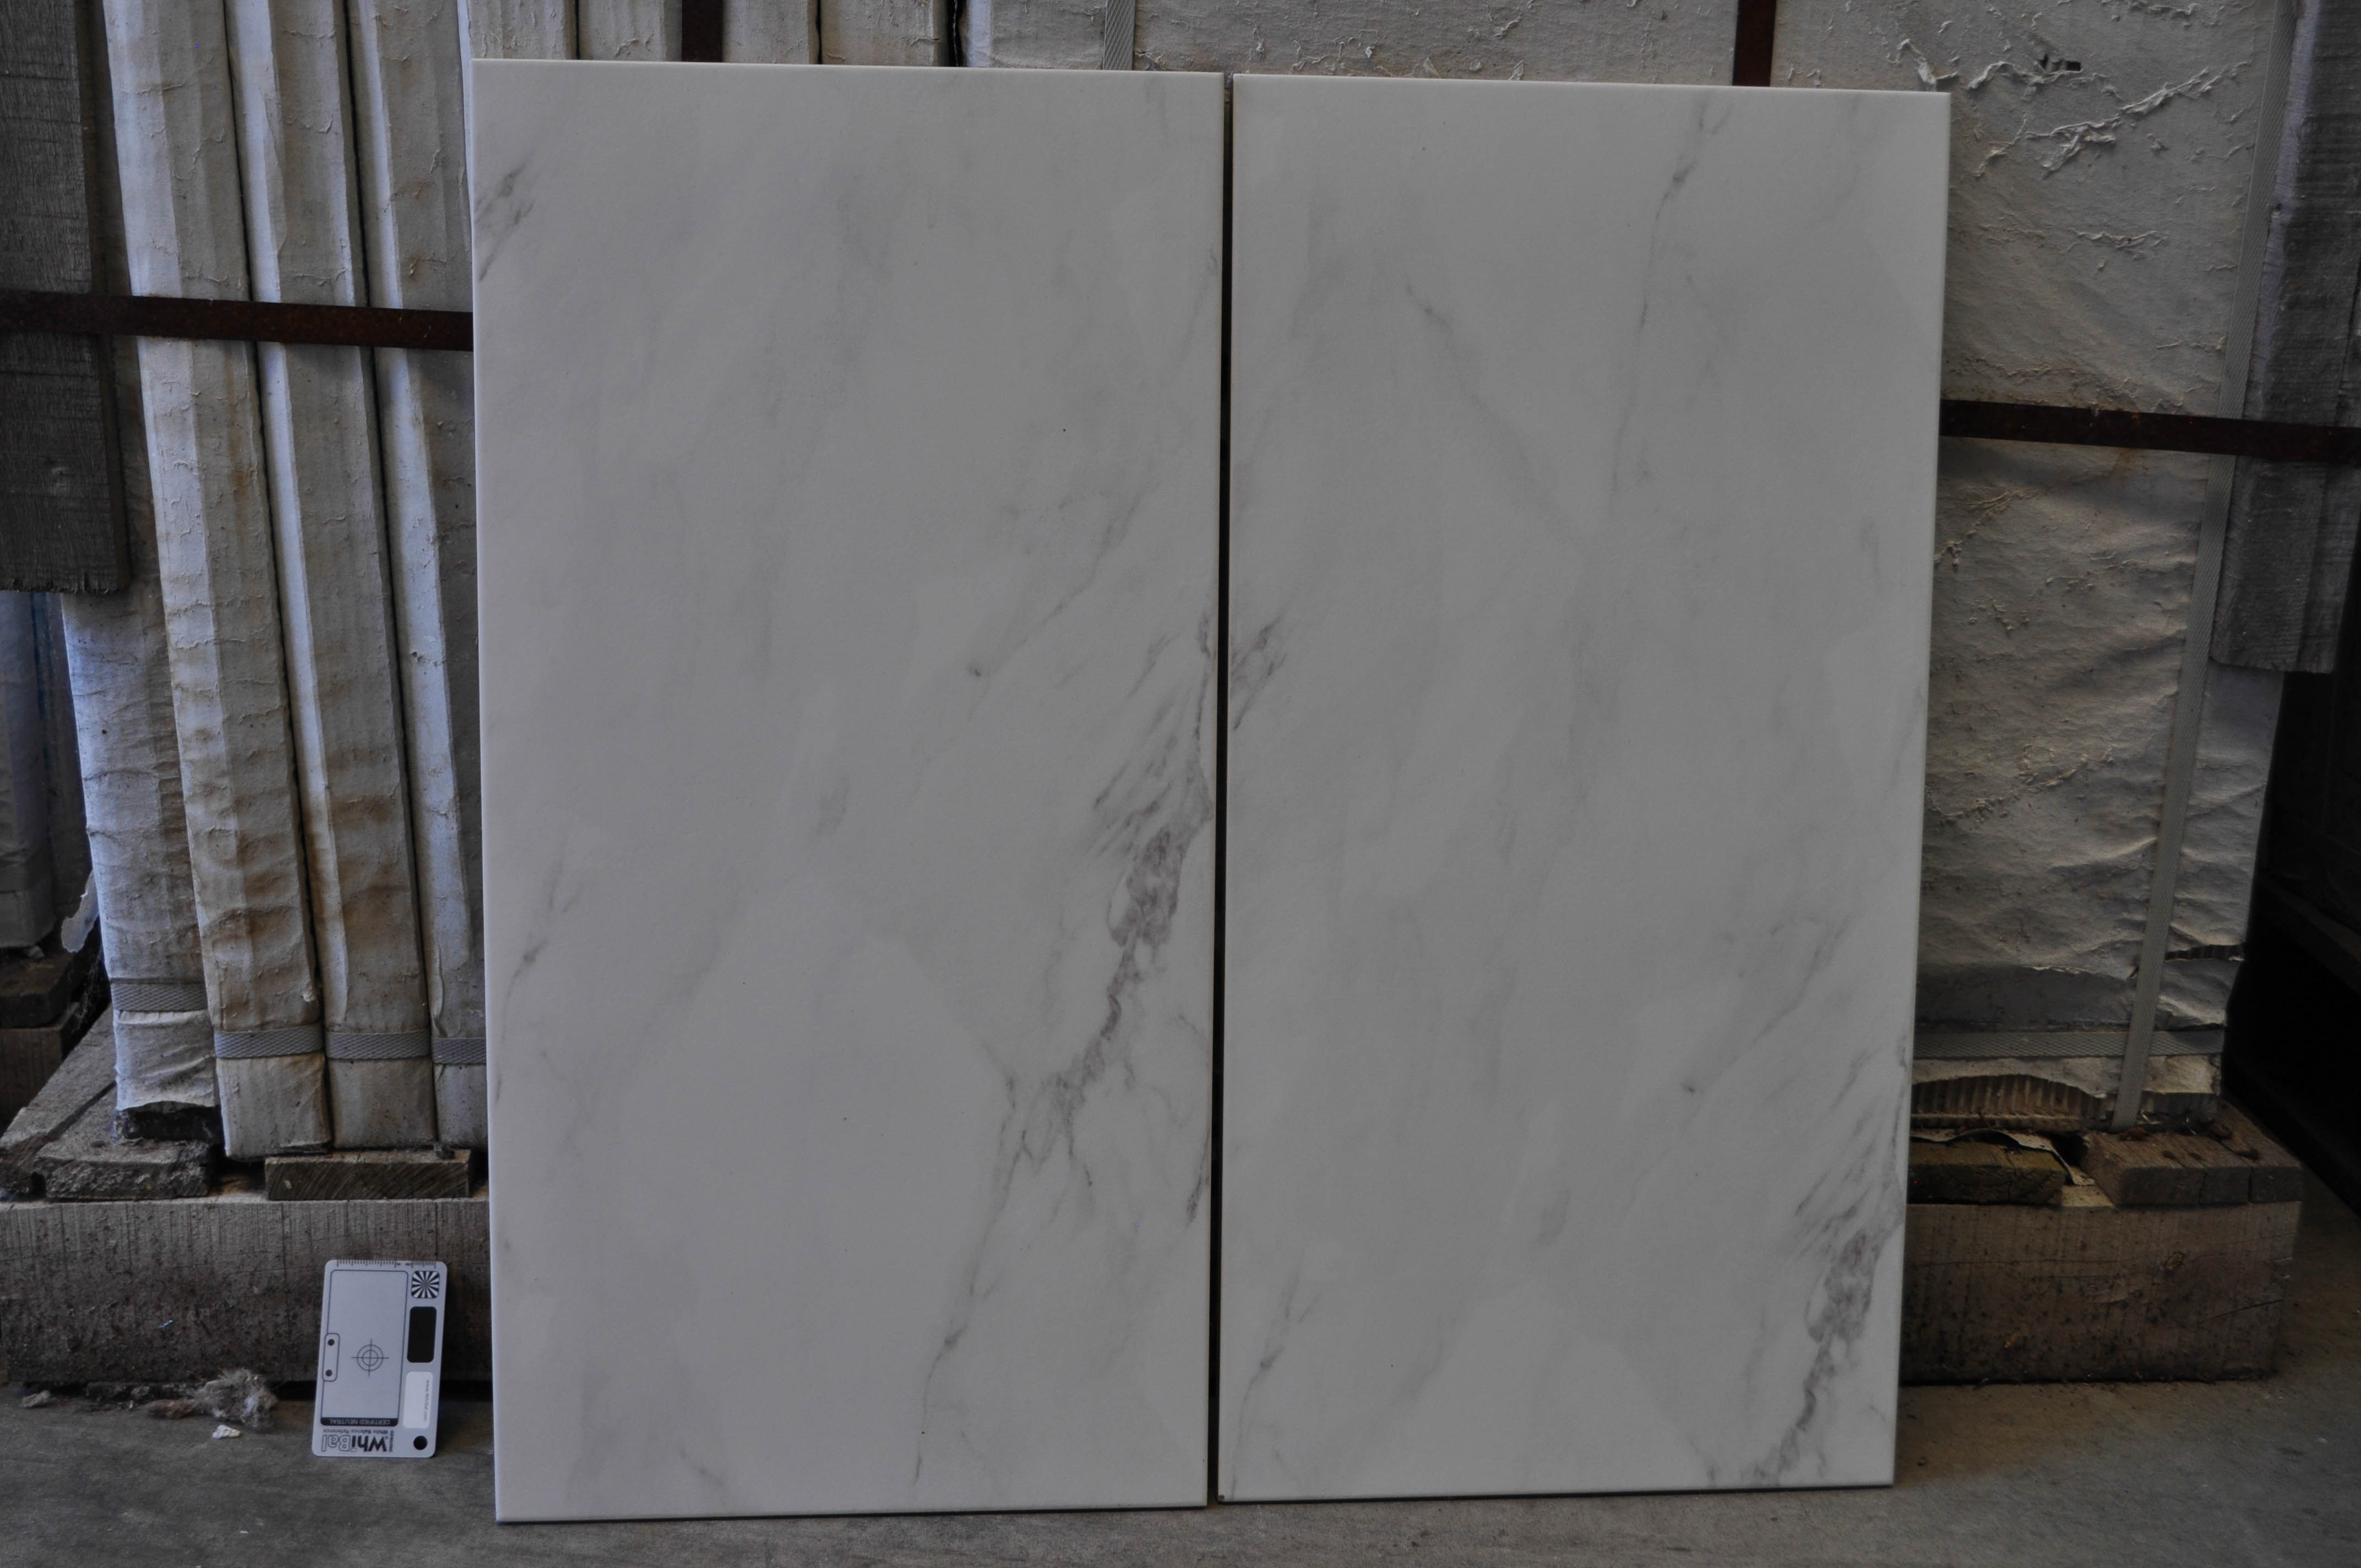 a sales sample of a 30cm x 60cm porcelain tile, with a white marble look, available for purchase from Concord
             Floors